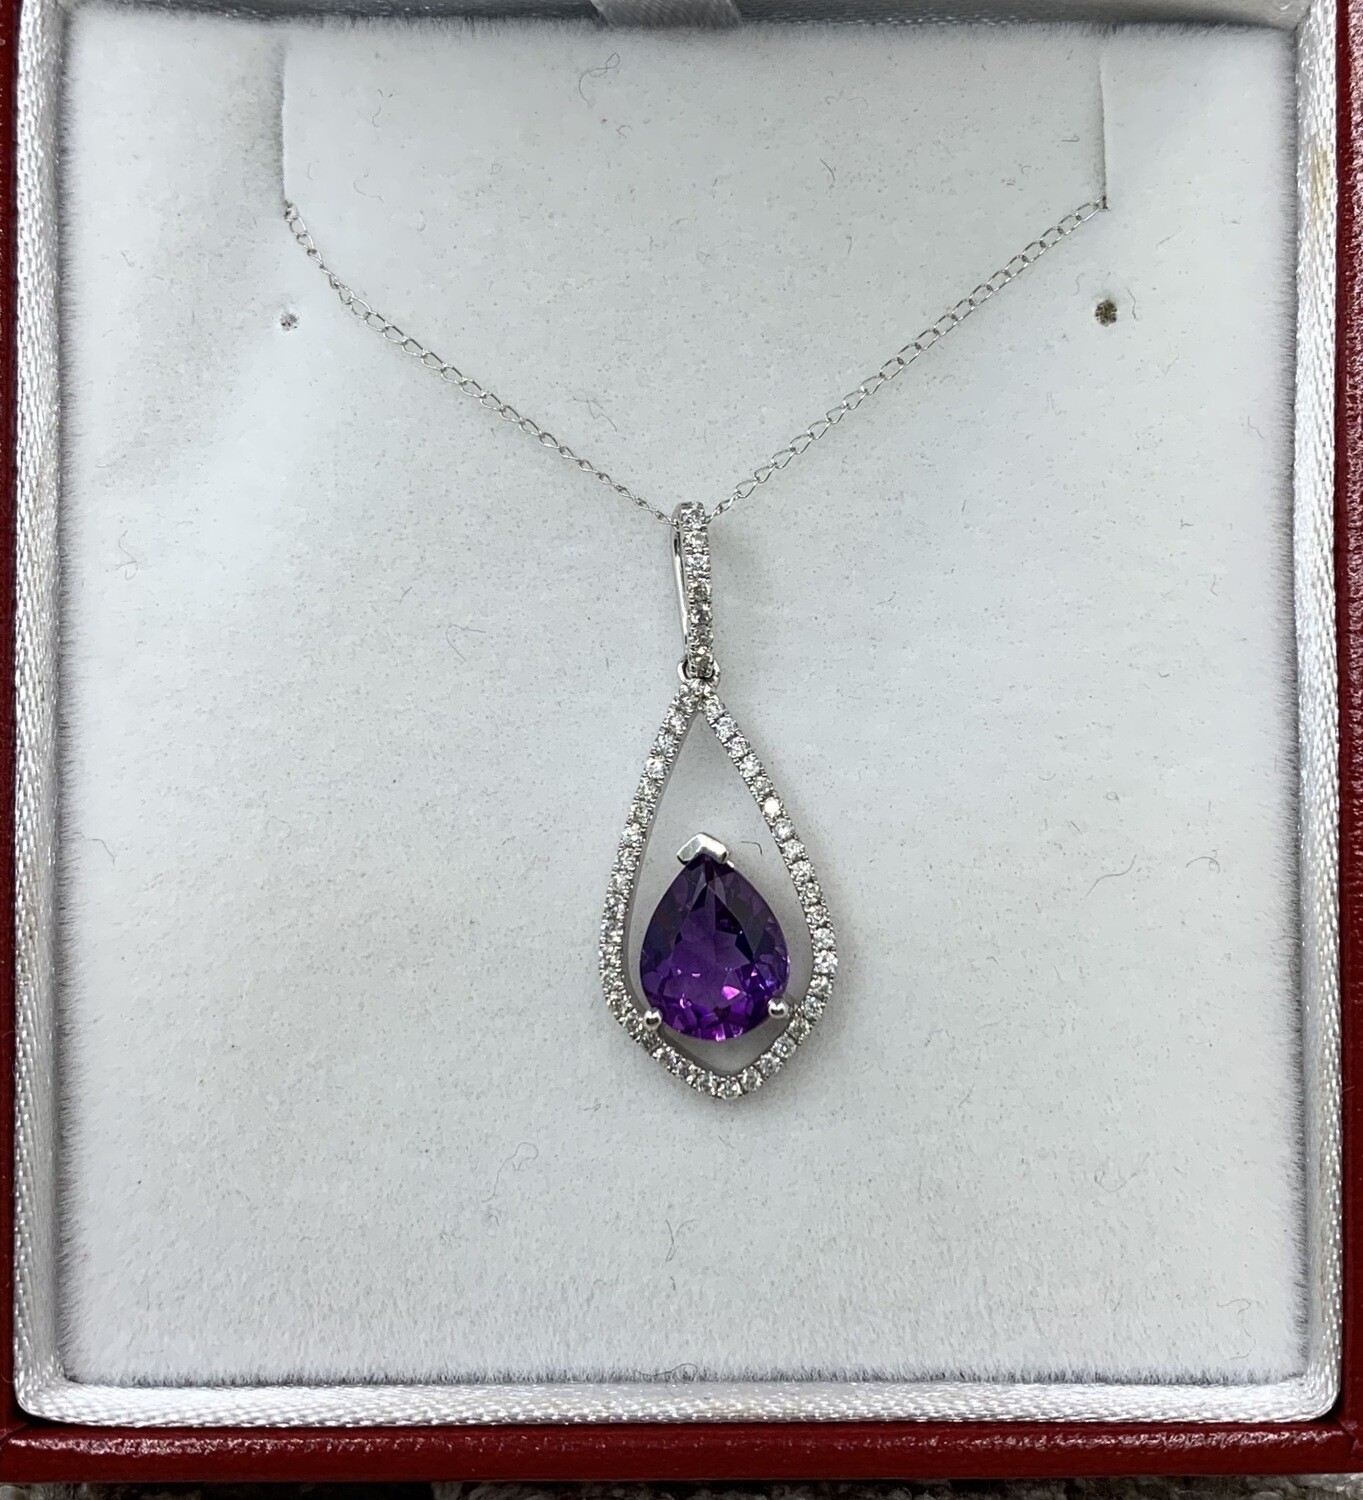 Amethyst Necklace Pear Shape with 25pts Diamond Halo Set in 14Kt. White Gold